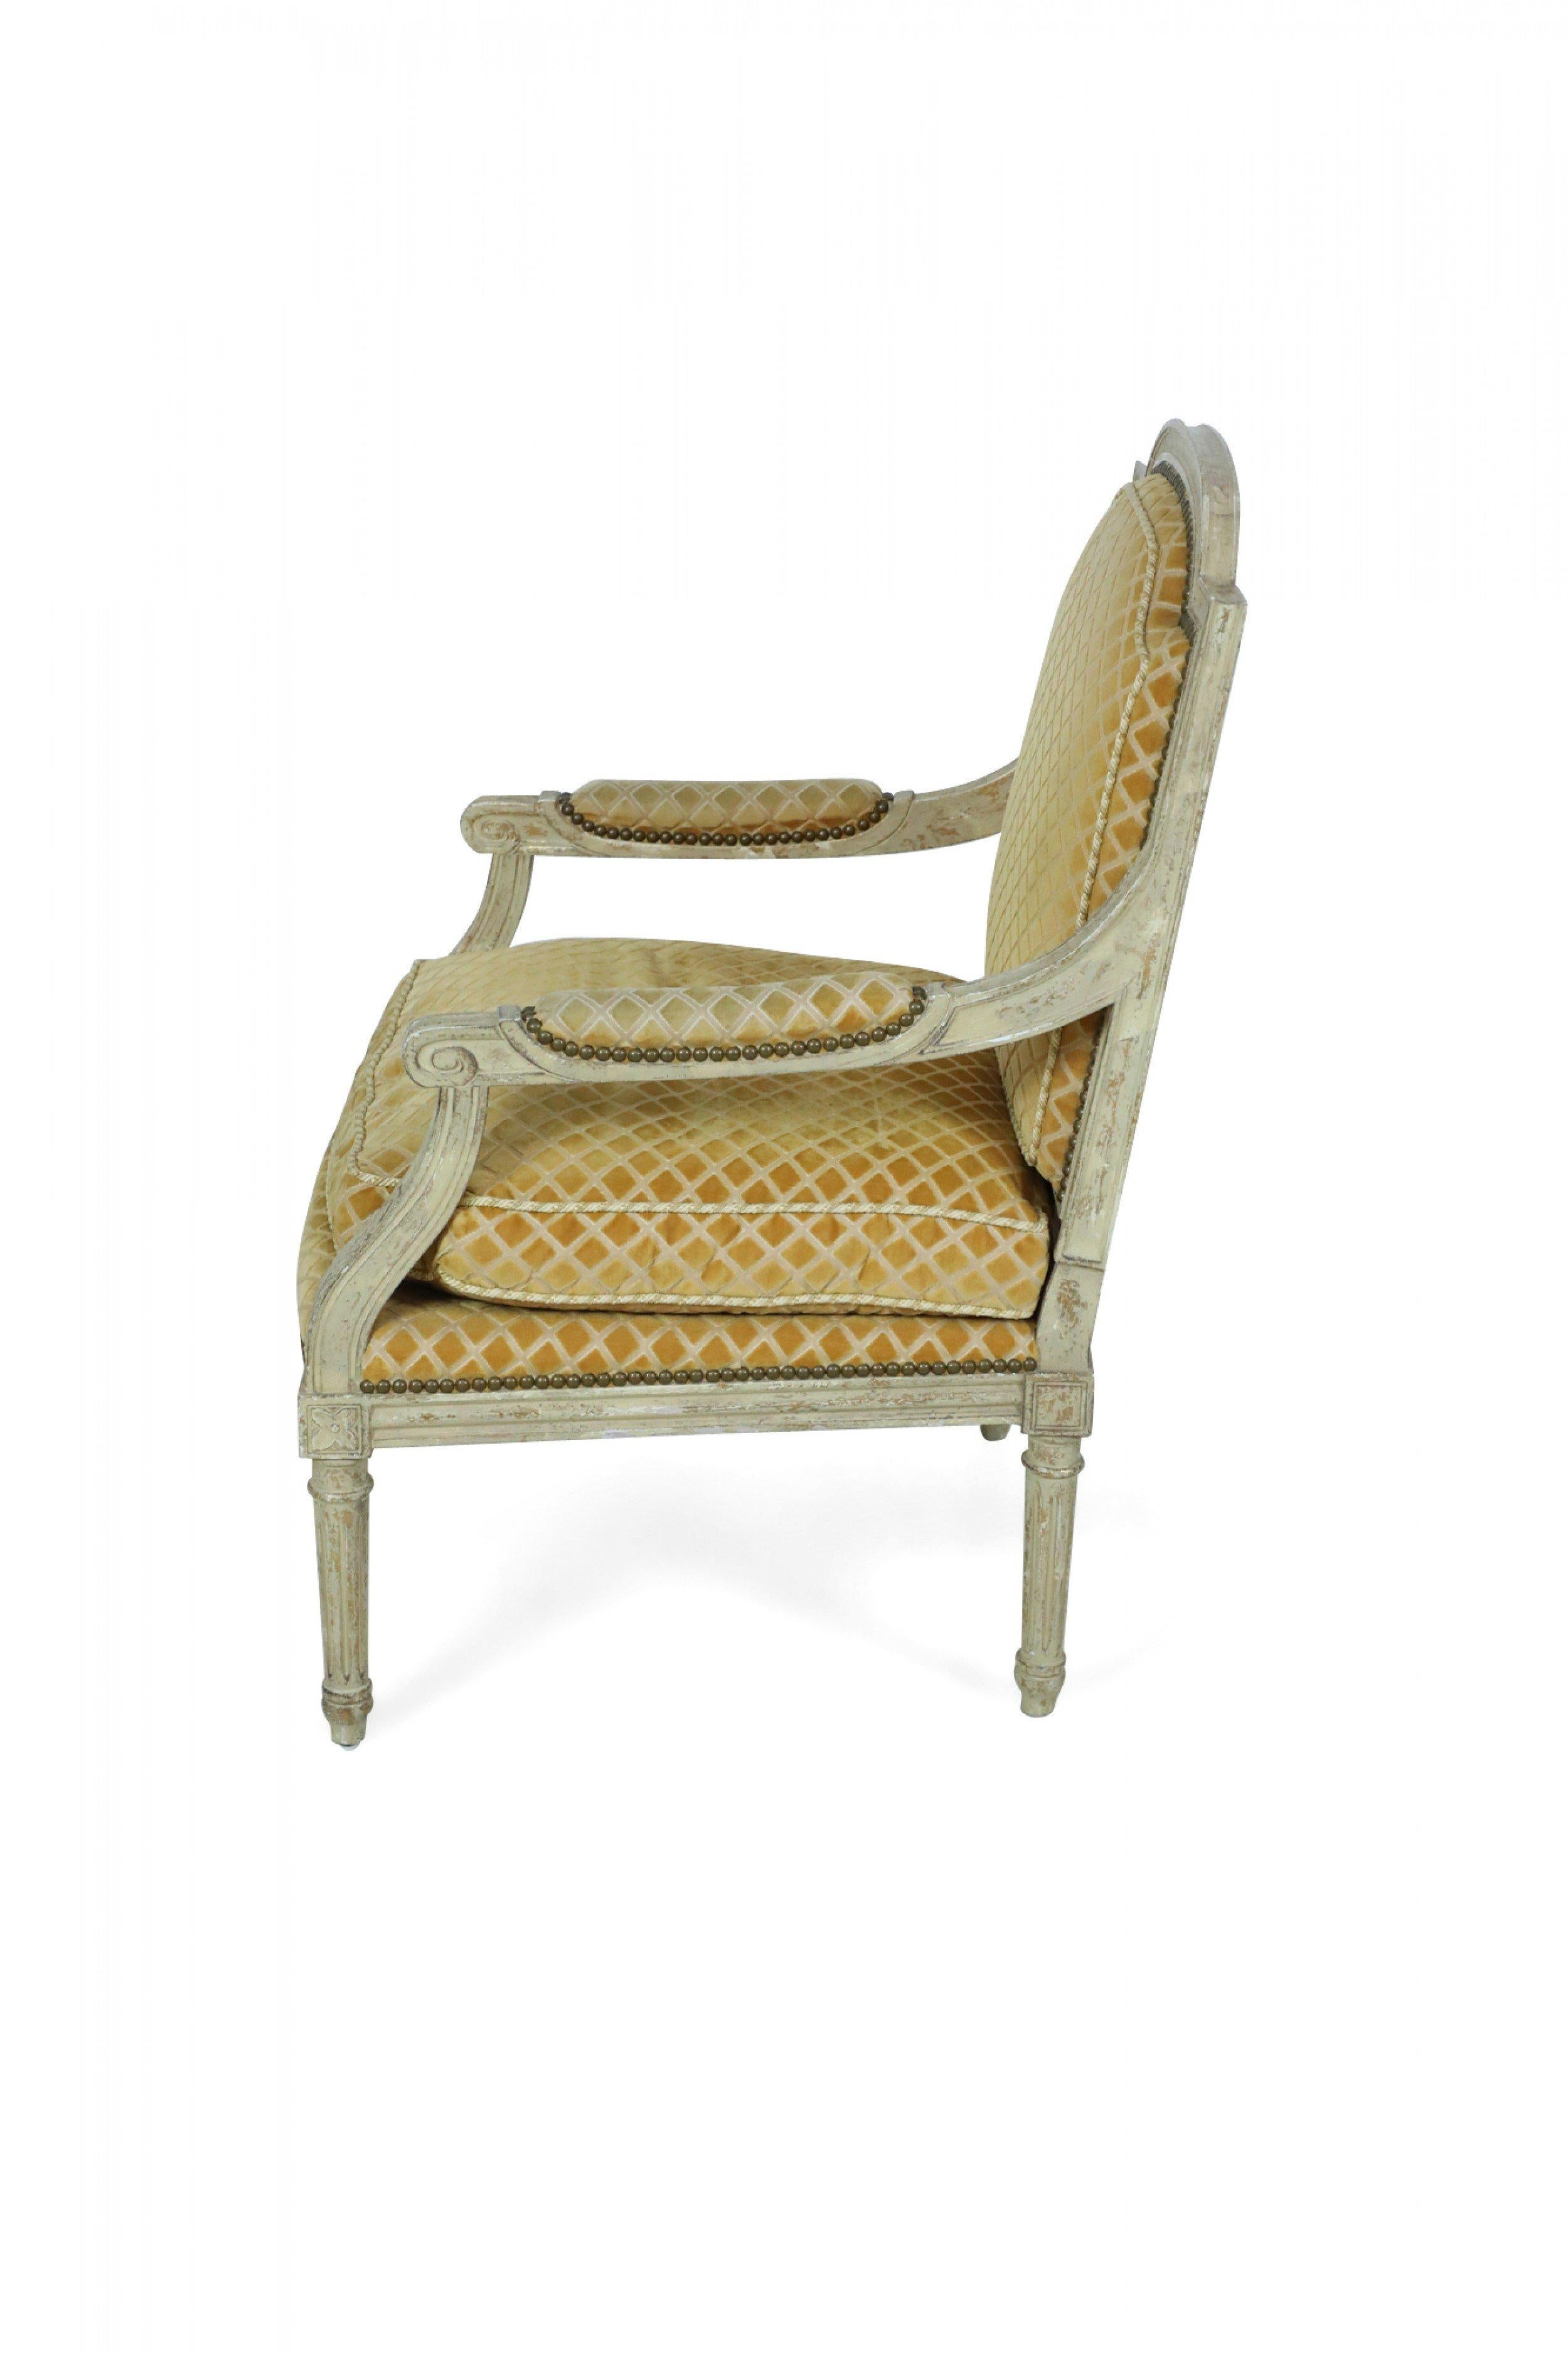 Pair of Louis XVI-Style Gold Upholstered Fauteuils / Armchairs For Sale 1